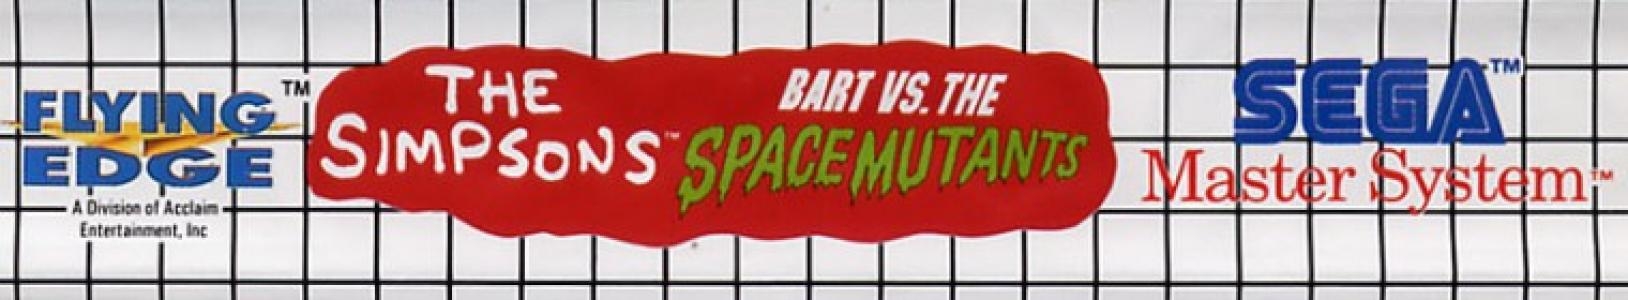 The Simpsons: Bart vs. The Space Mutants banner